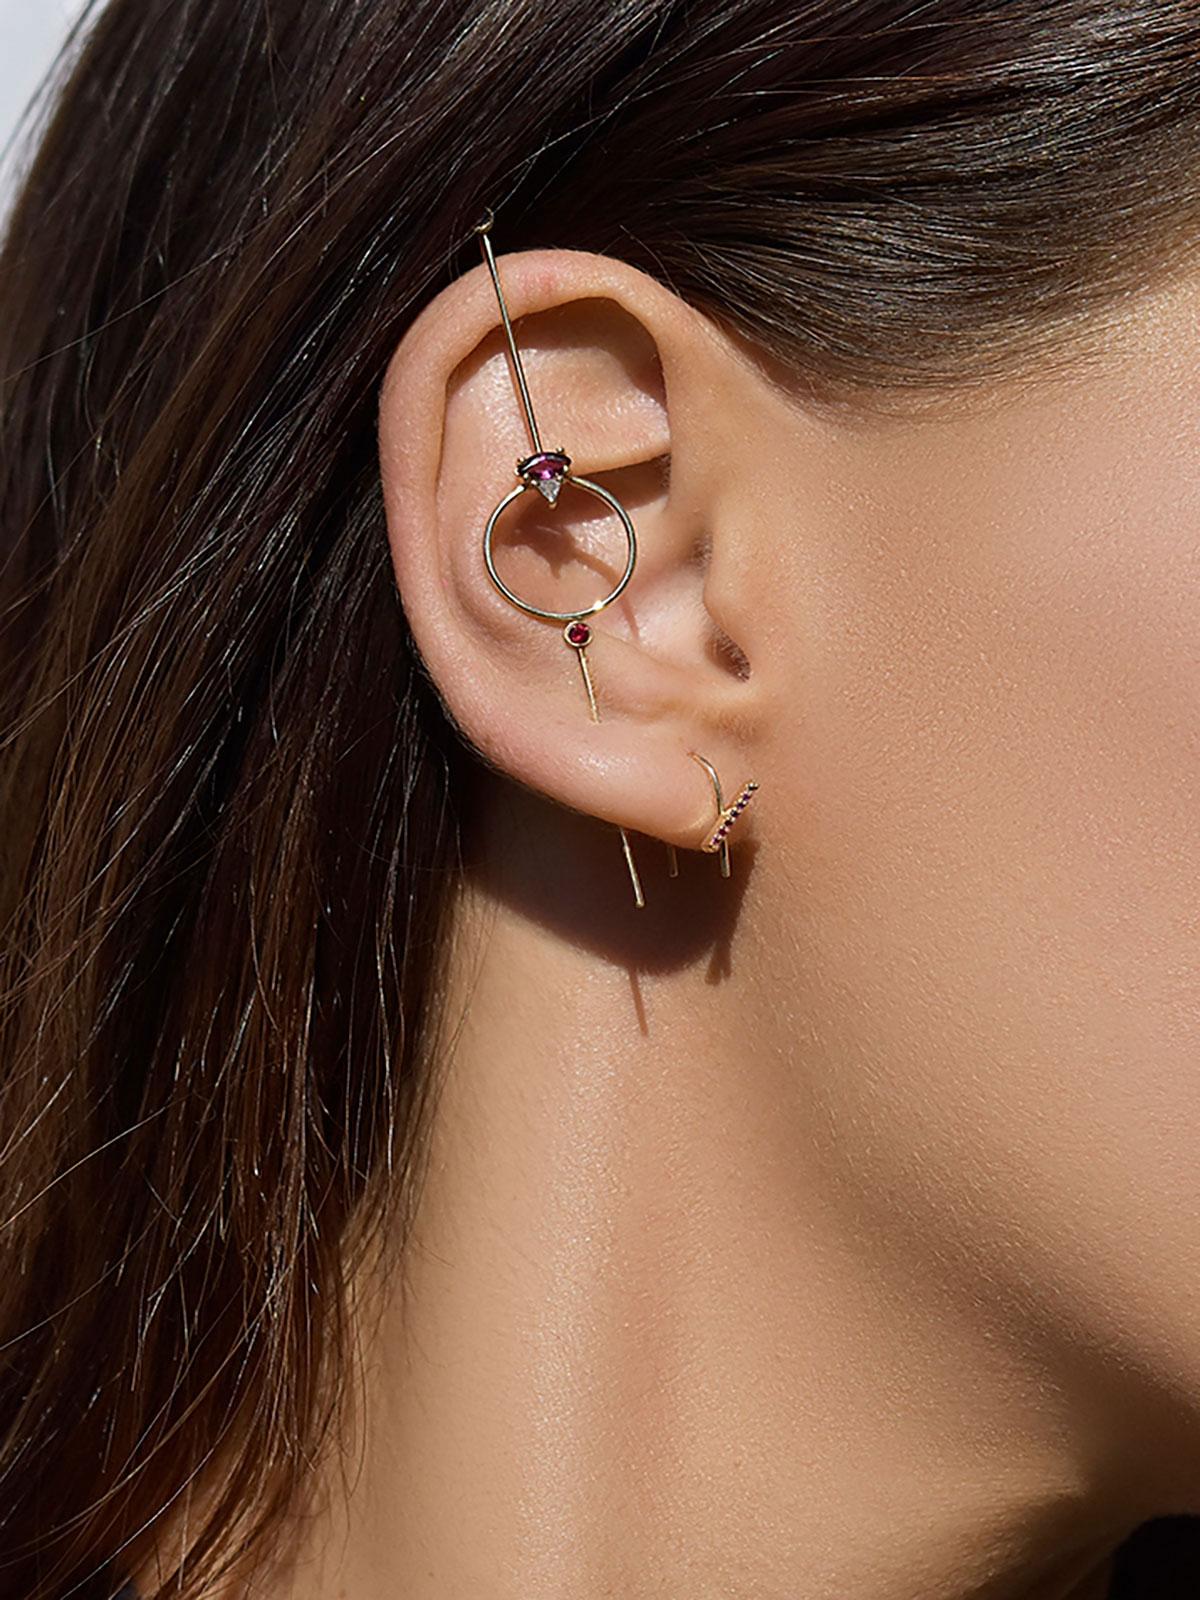 The Seeing Eye Needle Earring is constructed of a needle like gold rod that pierces through your ear lobe and hooks on top. This style is comprised of a circe adorned with gems. 

How to wear it: 
Thread the needle end through the ear lobe piercing